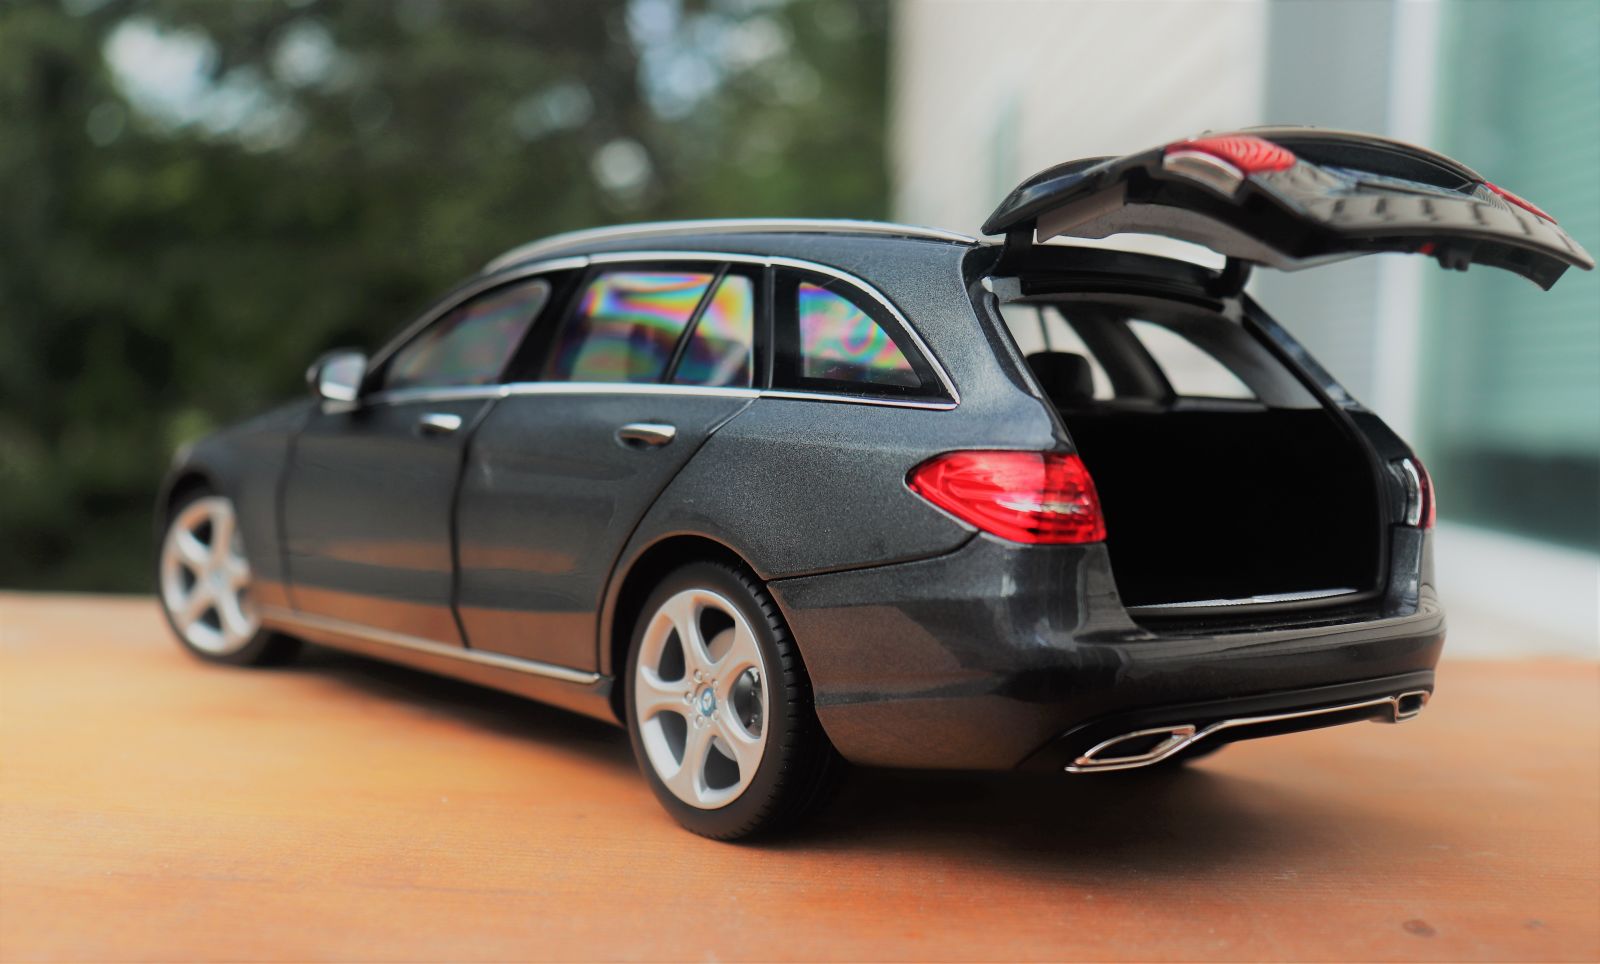 Illustration for article titled 1/18 Mercedes Benz S205 C-Class Wagon